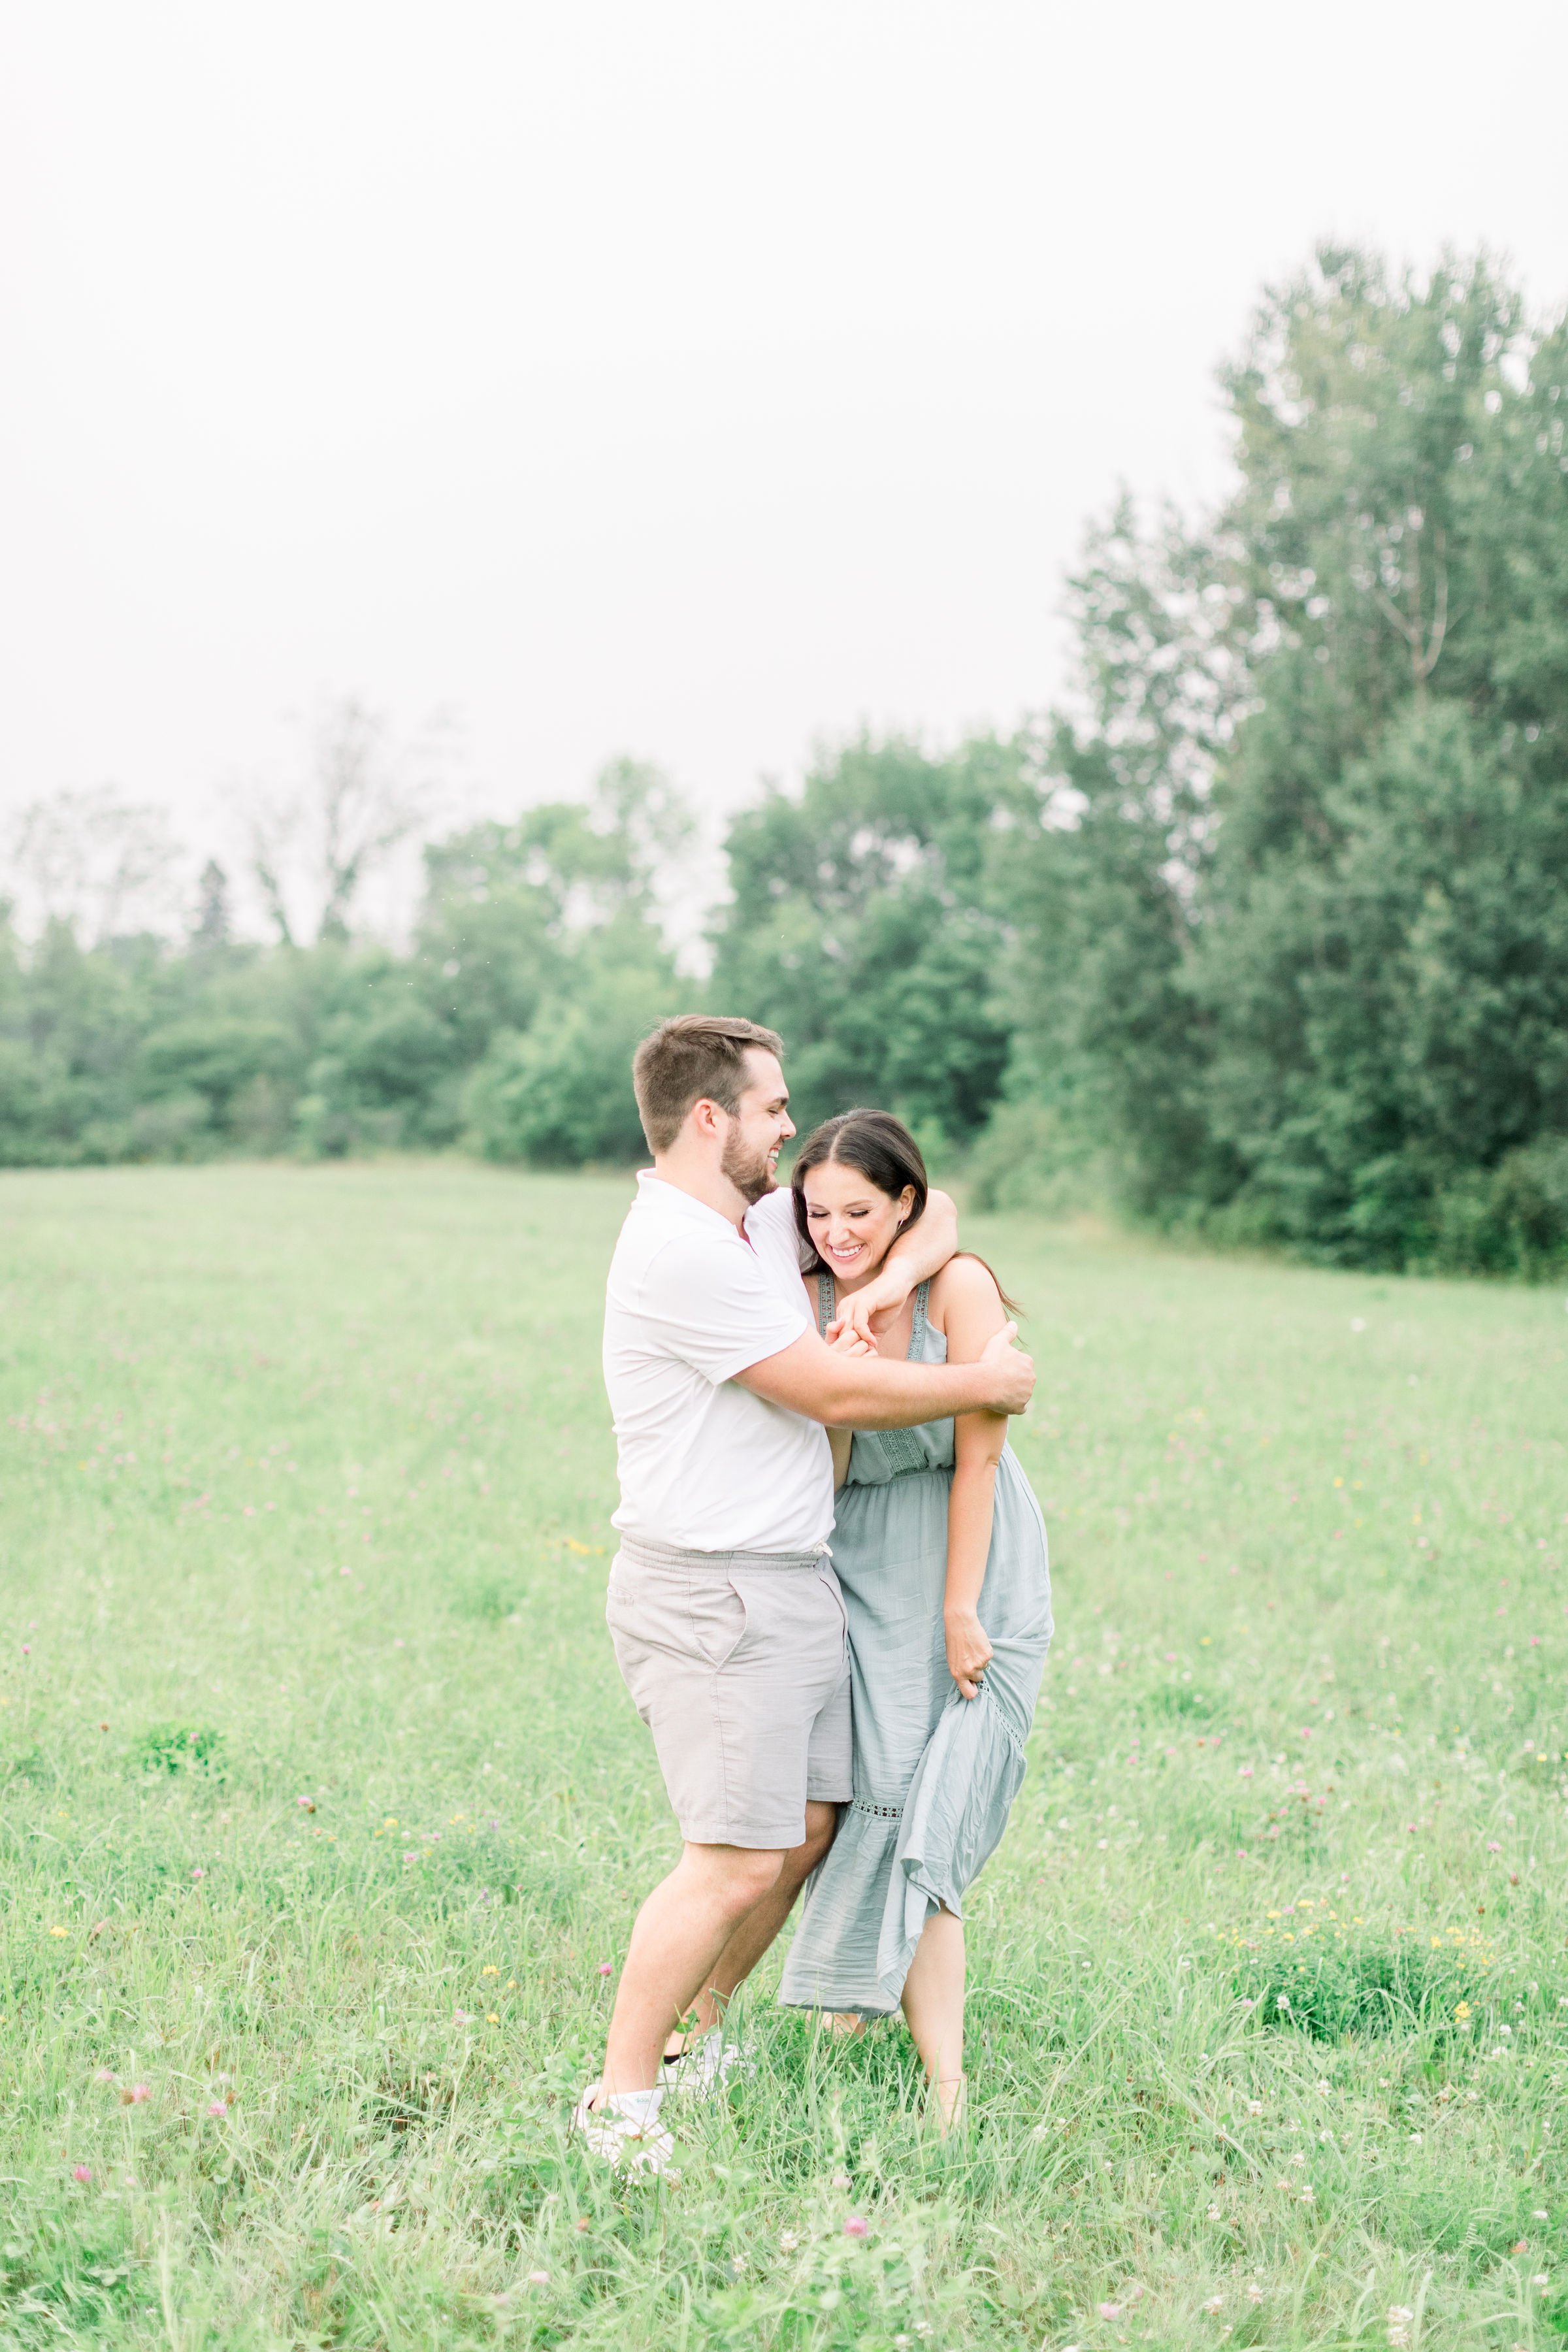  A man kisses the side of his fiances head captured by Chelsea Mason Photography. Kingston photographers engagements #Kingstonengagementlocations #GrassCreekParkPortraits #Ontarioengagementphotographers #Chelseamasonphotography #Chelseamasonengagemen